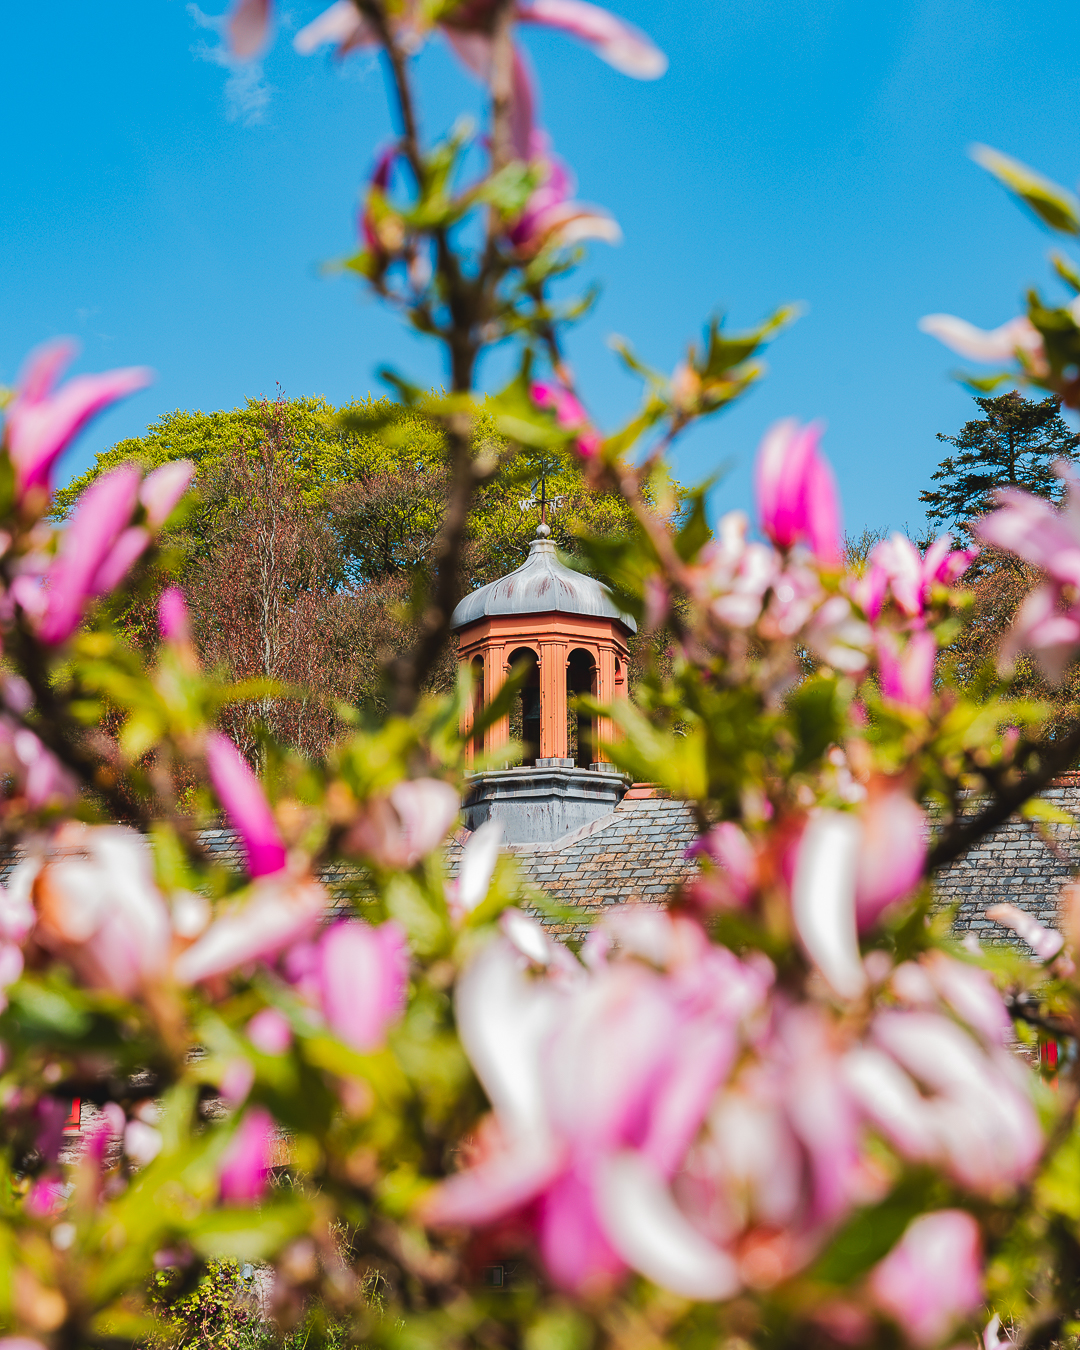 In focus in the background is the orange belltower on top of a roof, with blue skies and trees behind it. In the foreground, blurred slightly is newly blossoming magnolia flowers in a tree.